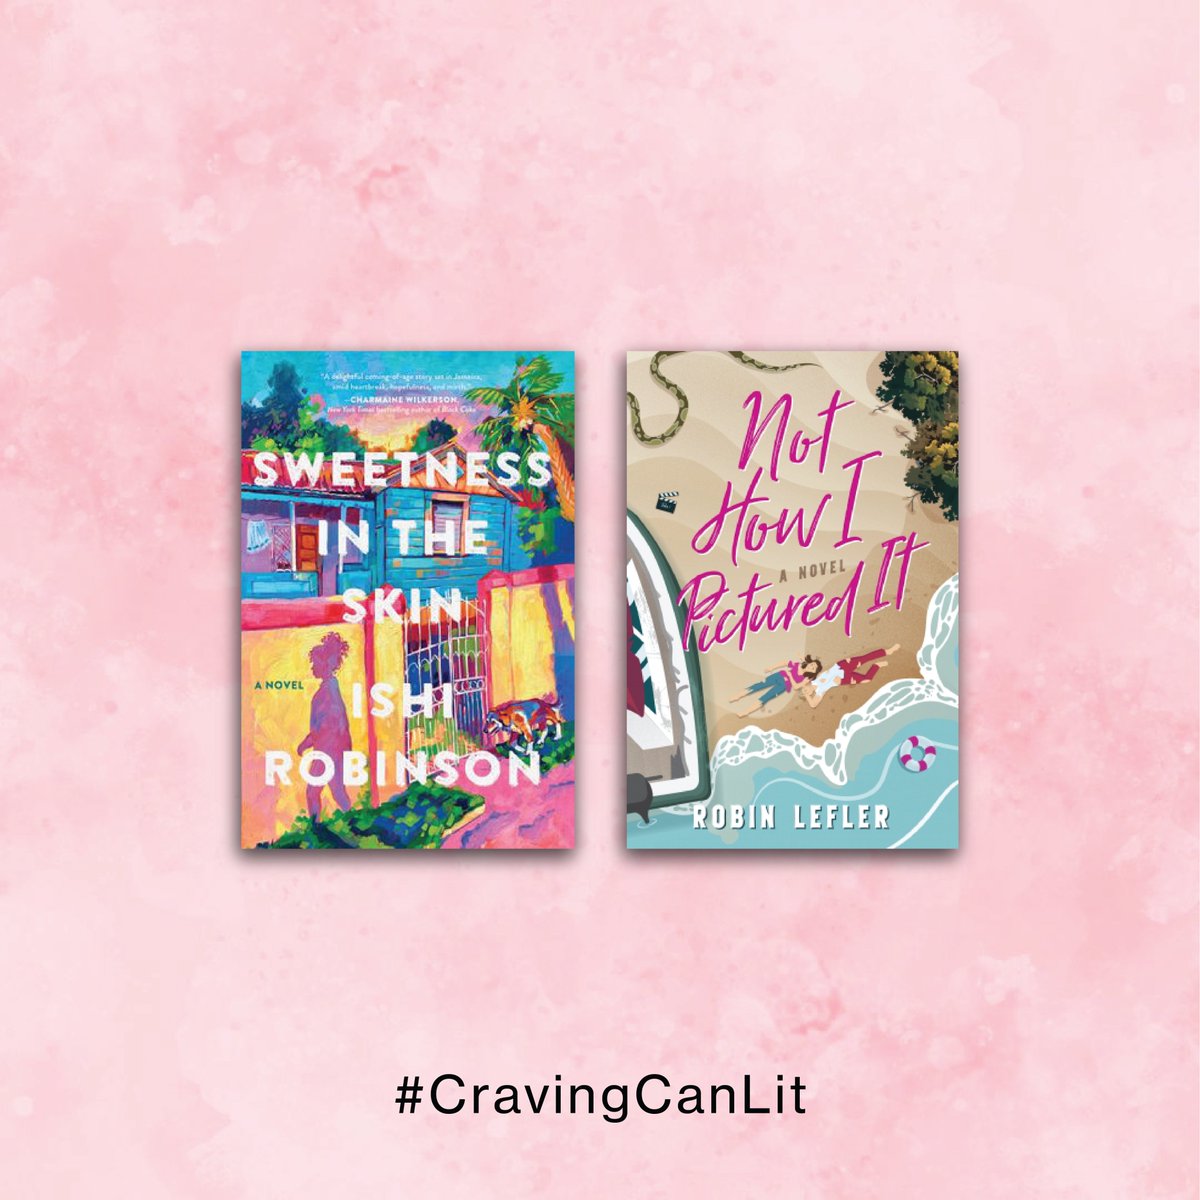 Two #CravingCanLit titles are out today! Sweetness in the Skin by Ishi Robinson (HarperAvenue) and Not How I Pictured It by Robin Lefler (HarperAvenue). @HarperCollinsCa